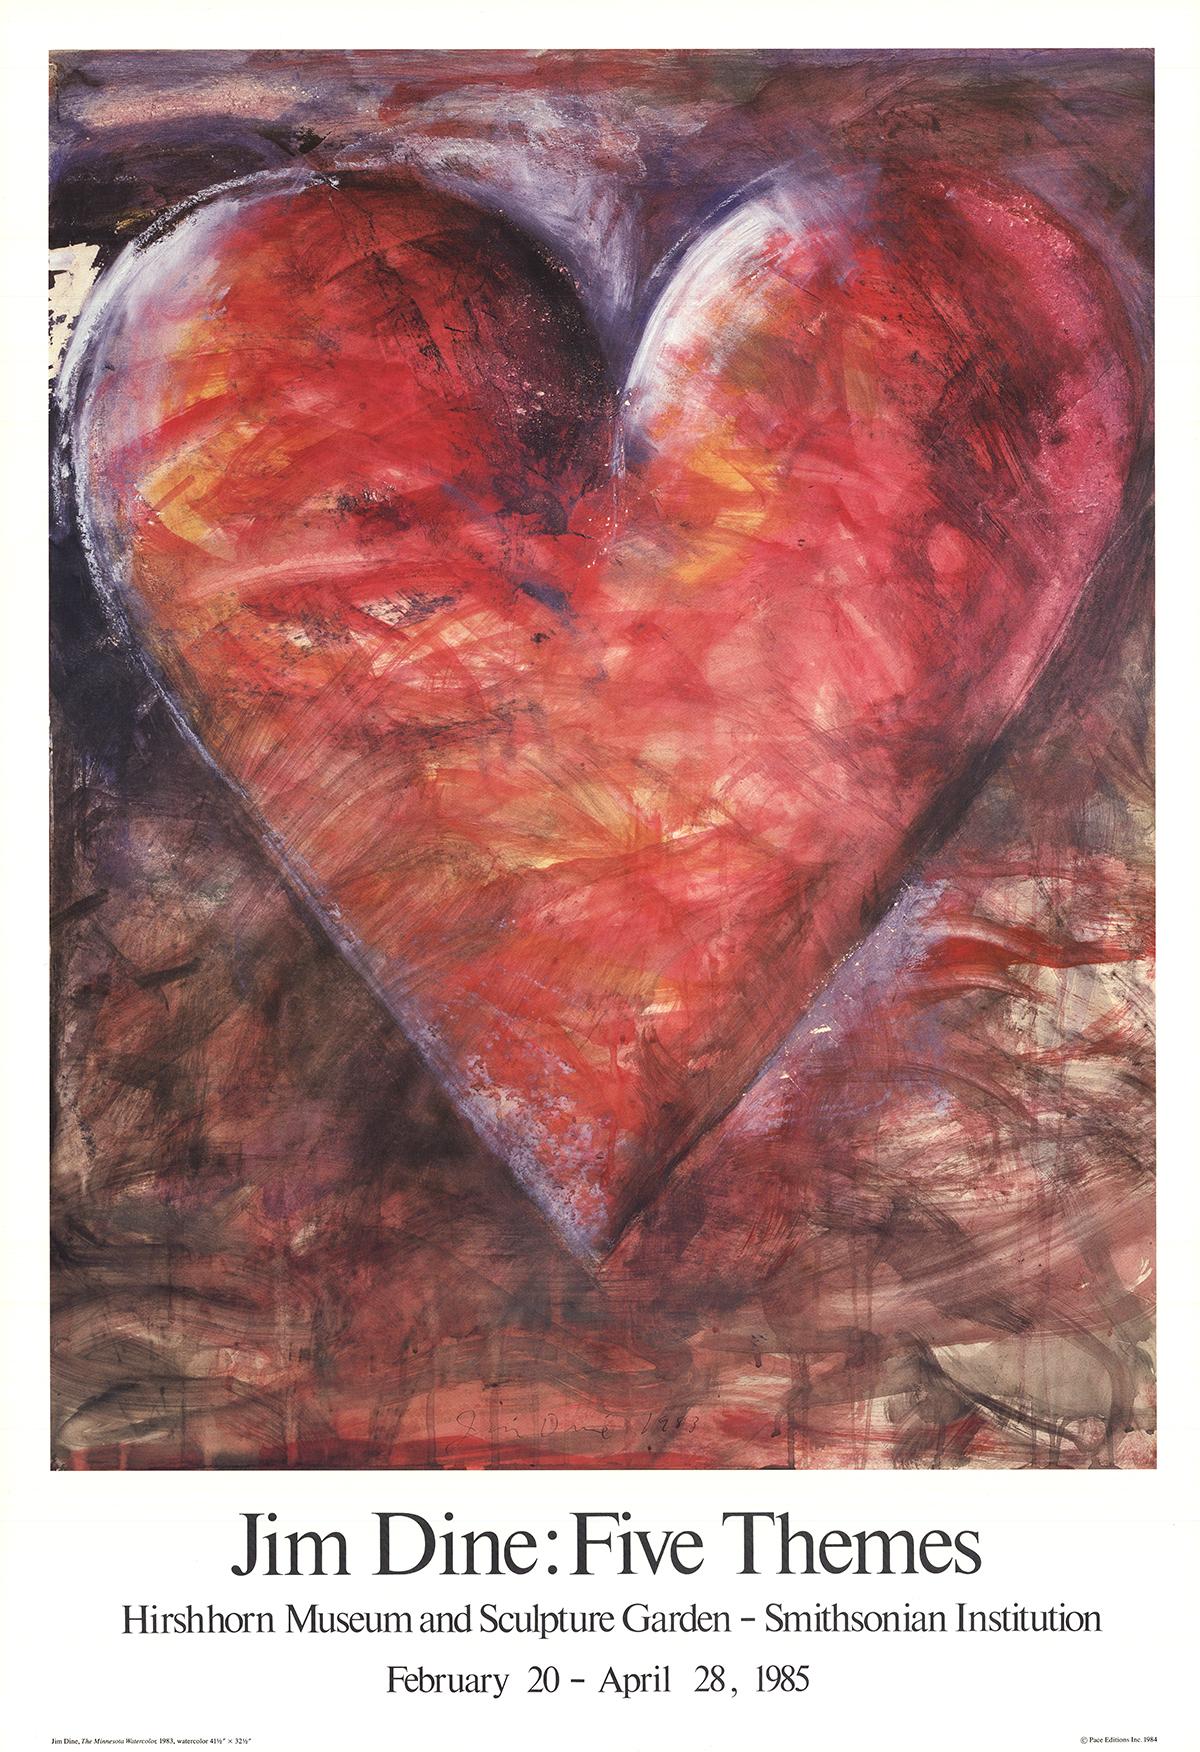 Poster for the Jim Dine exhibition titled Five Themes which was held at Hirshorn Museum and Sculpture Garden - Smithsonian Institution from Feb - April 1985.
